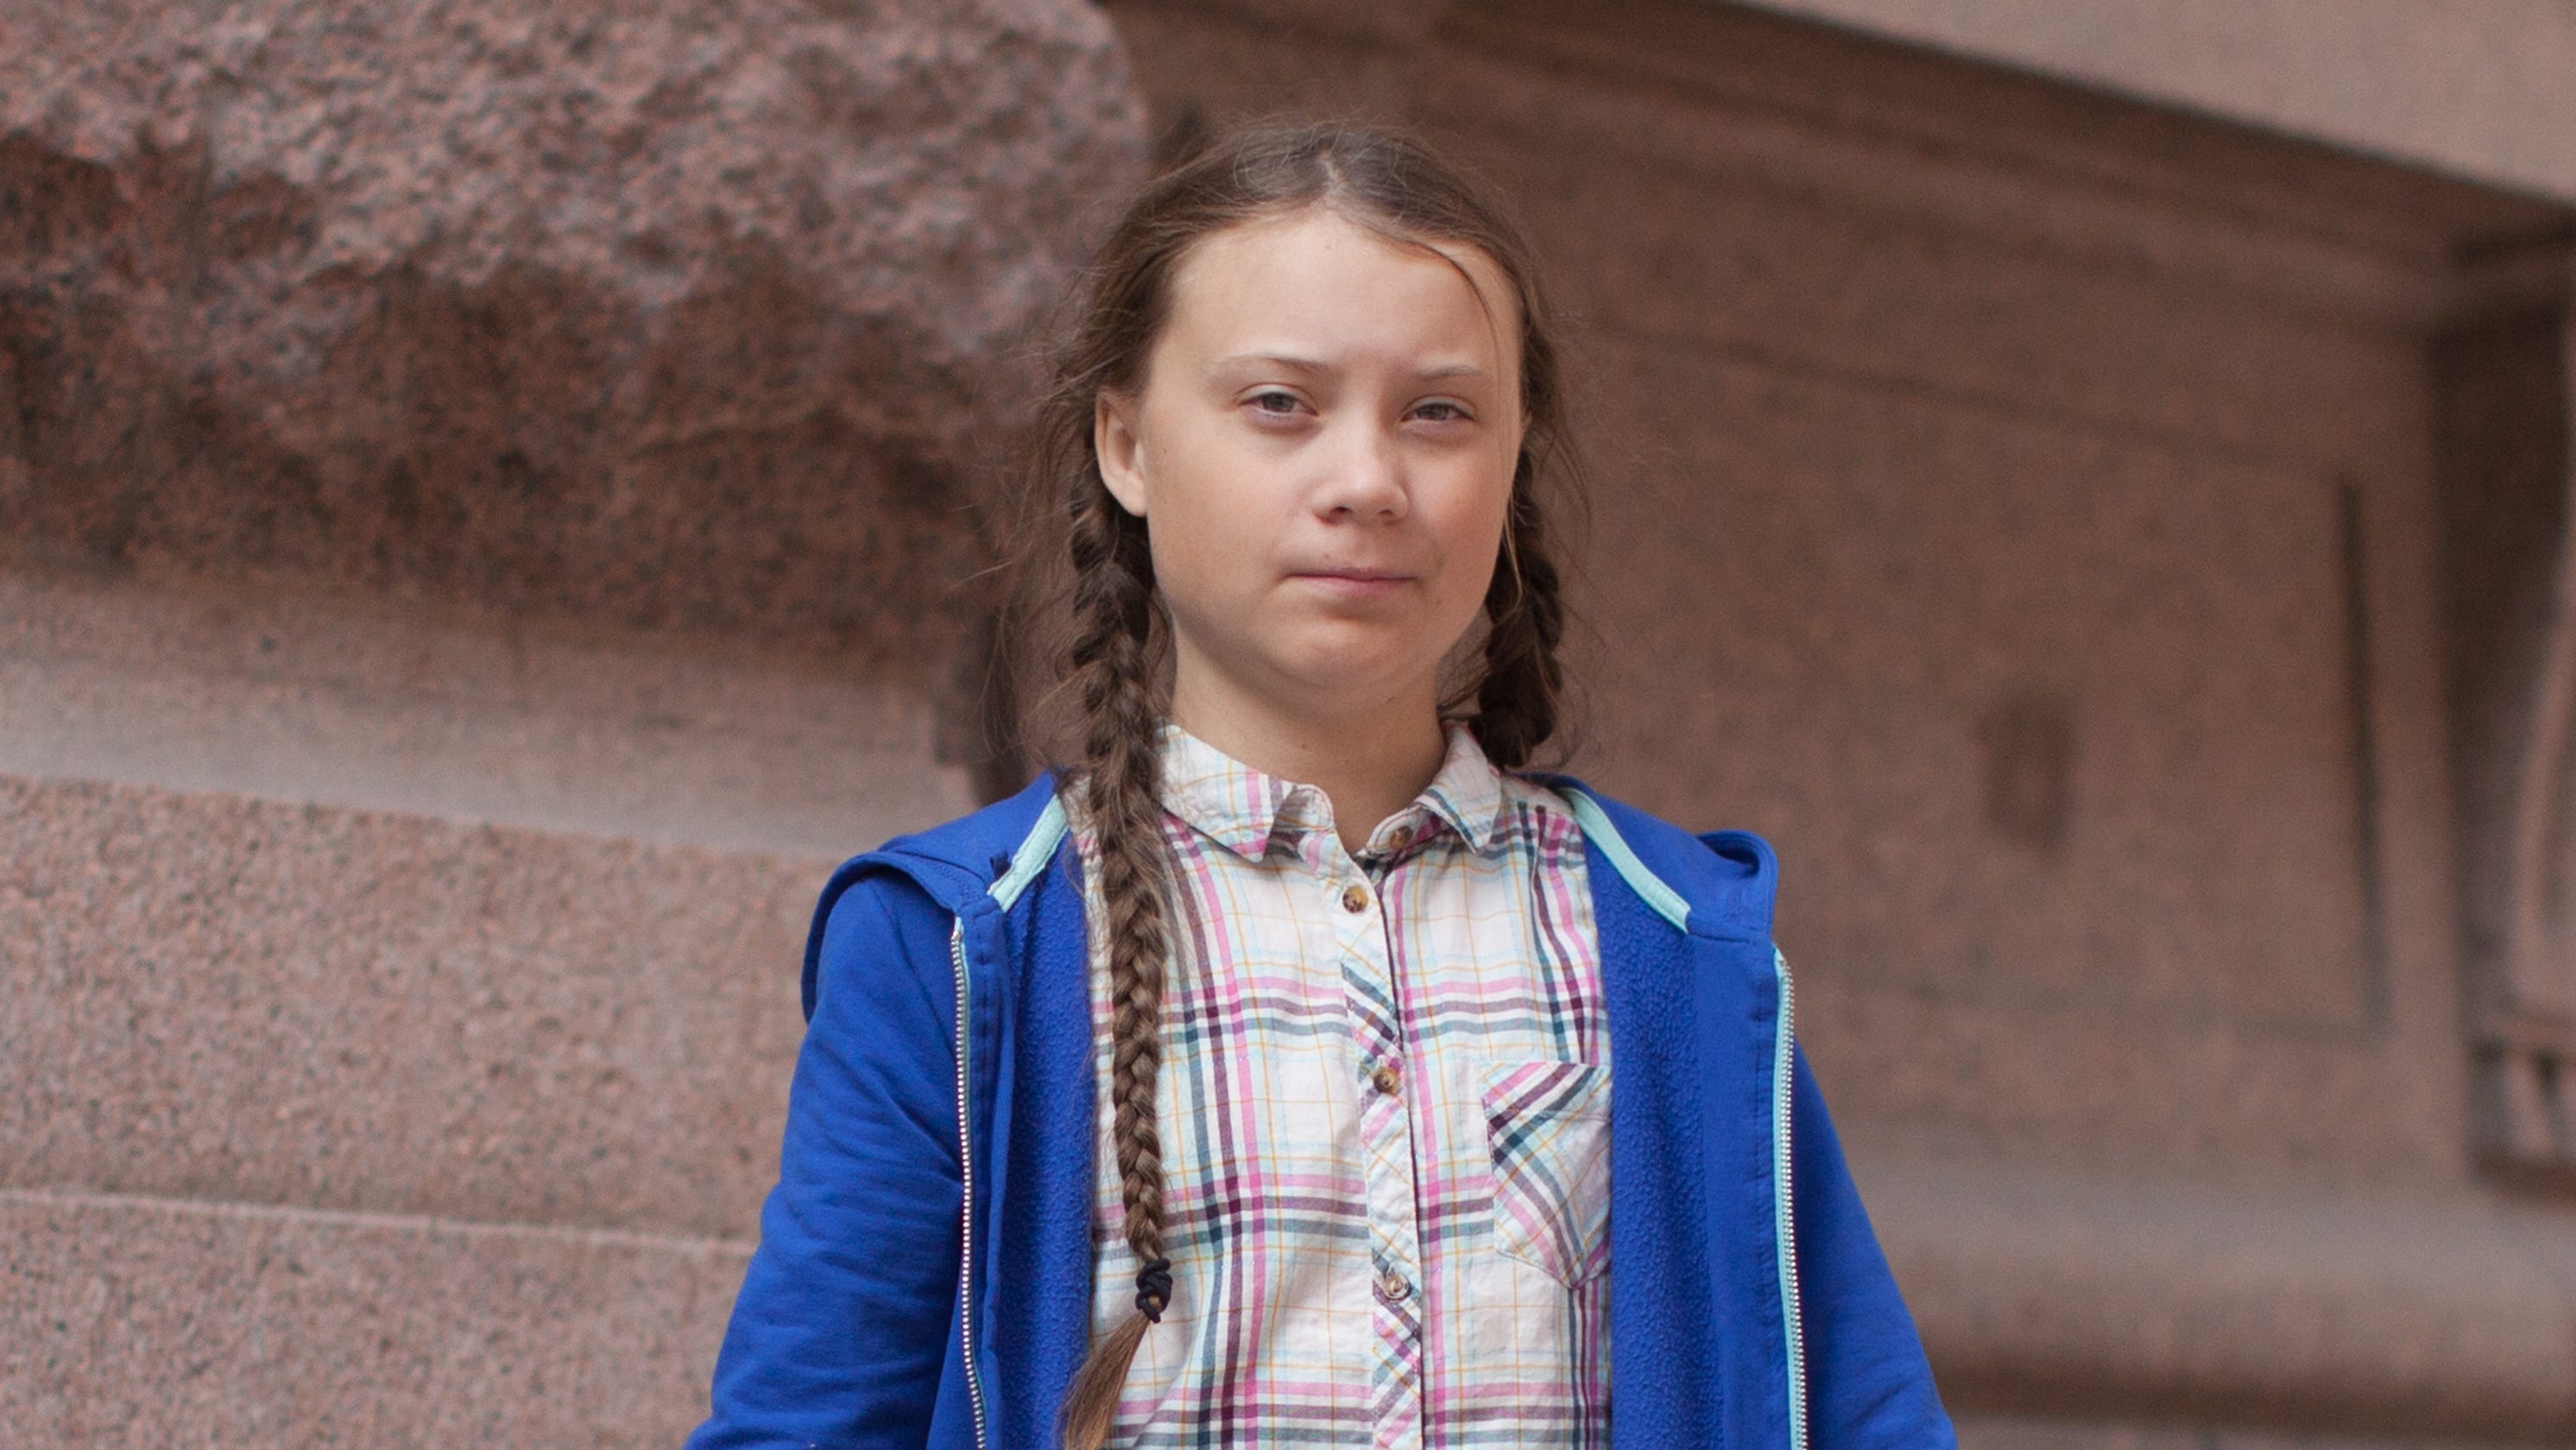 6 things to know about teenage climate change activist Greta Thunberg - USA TODAY